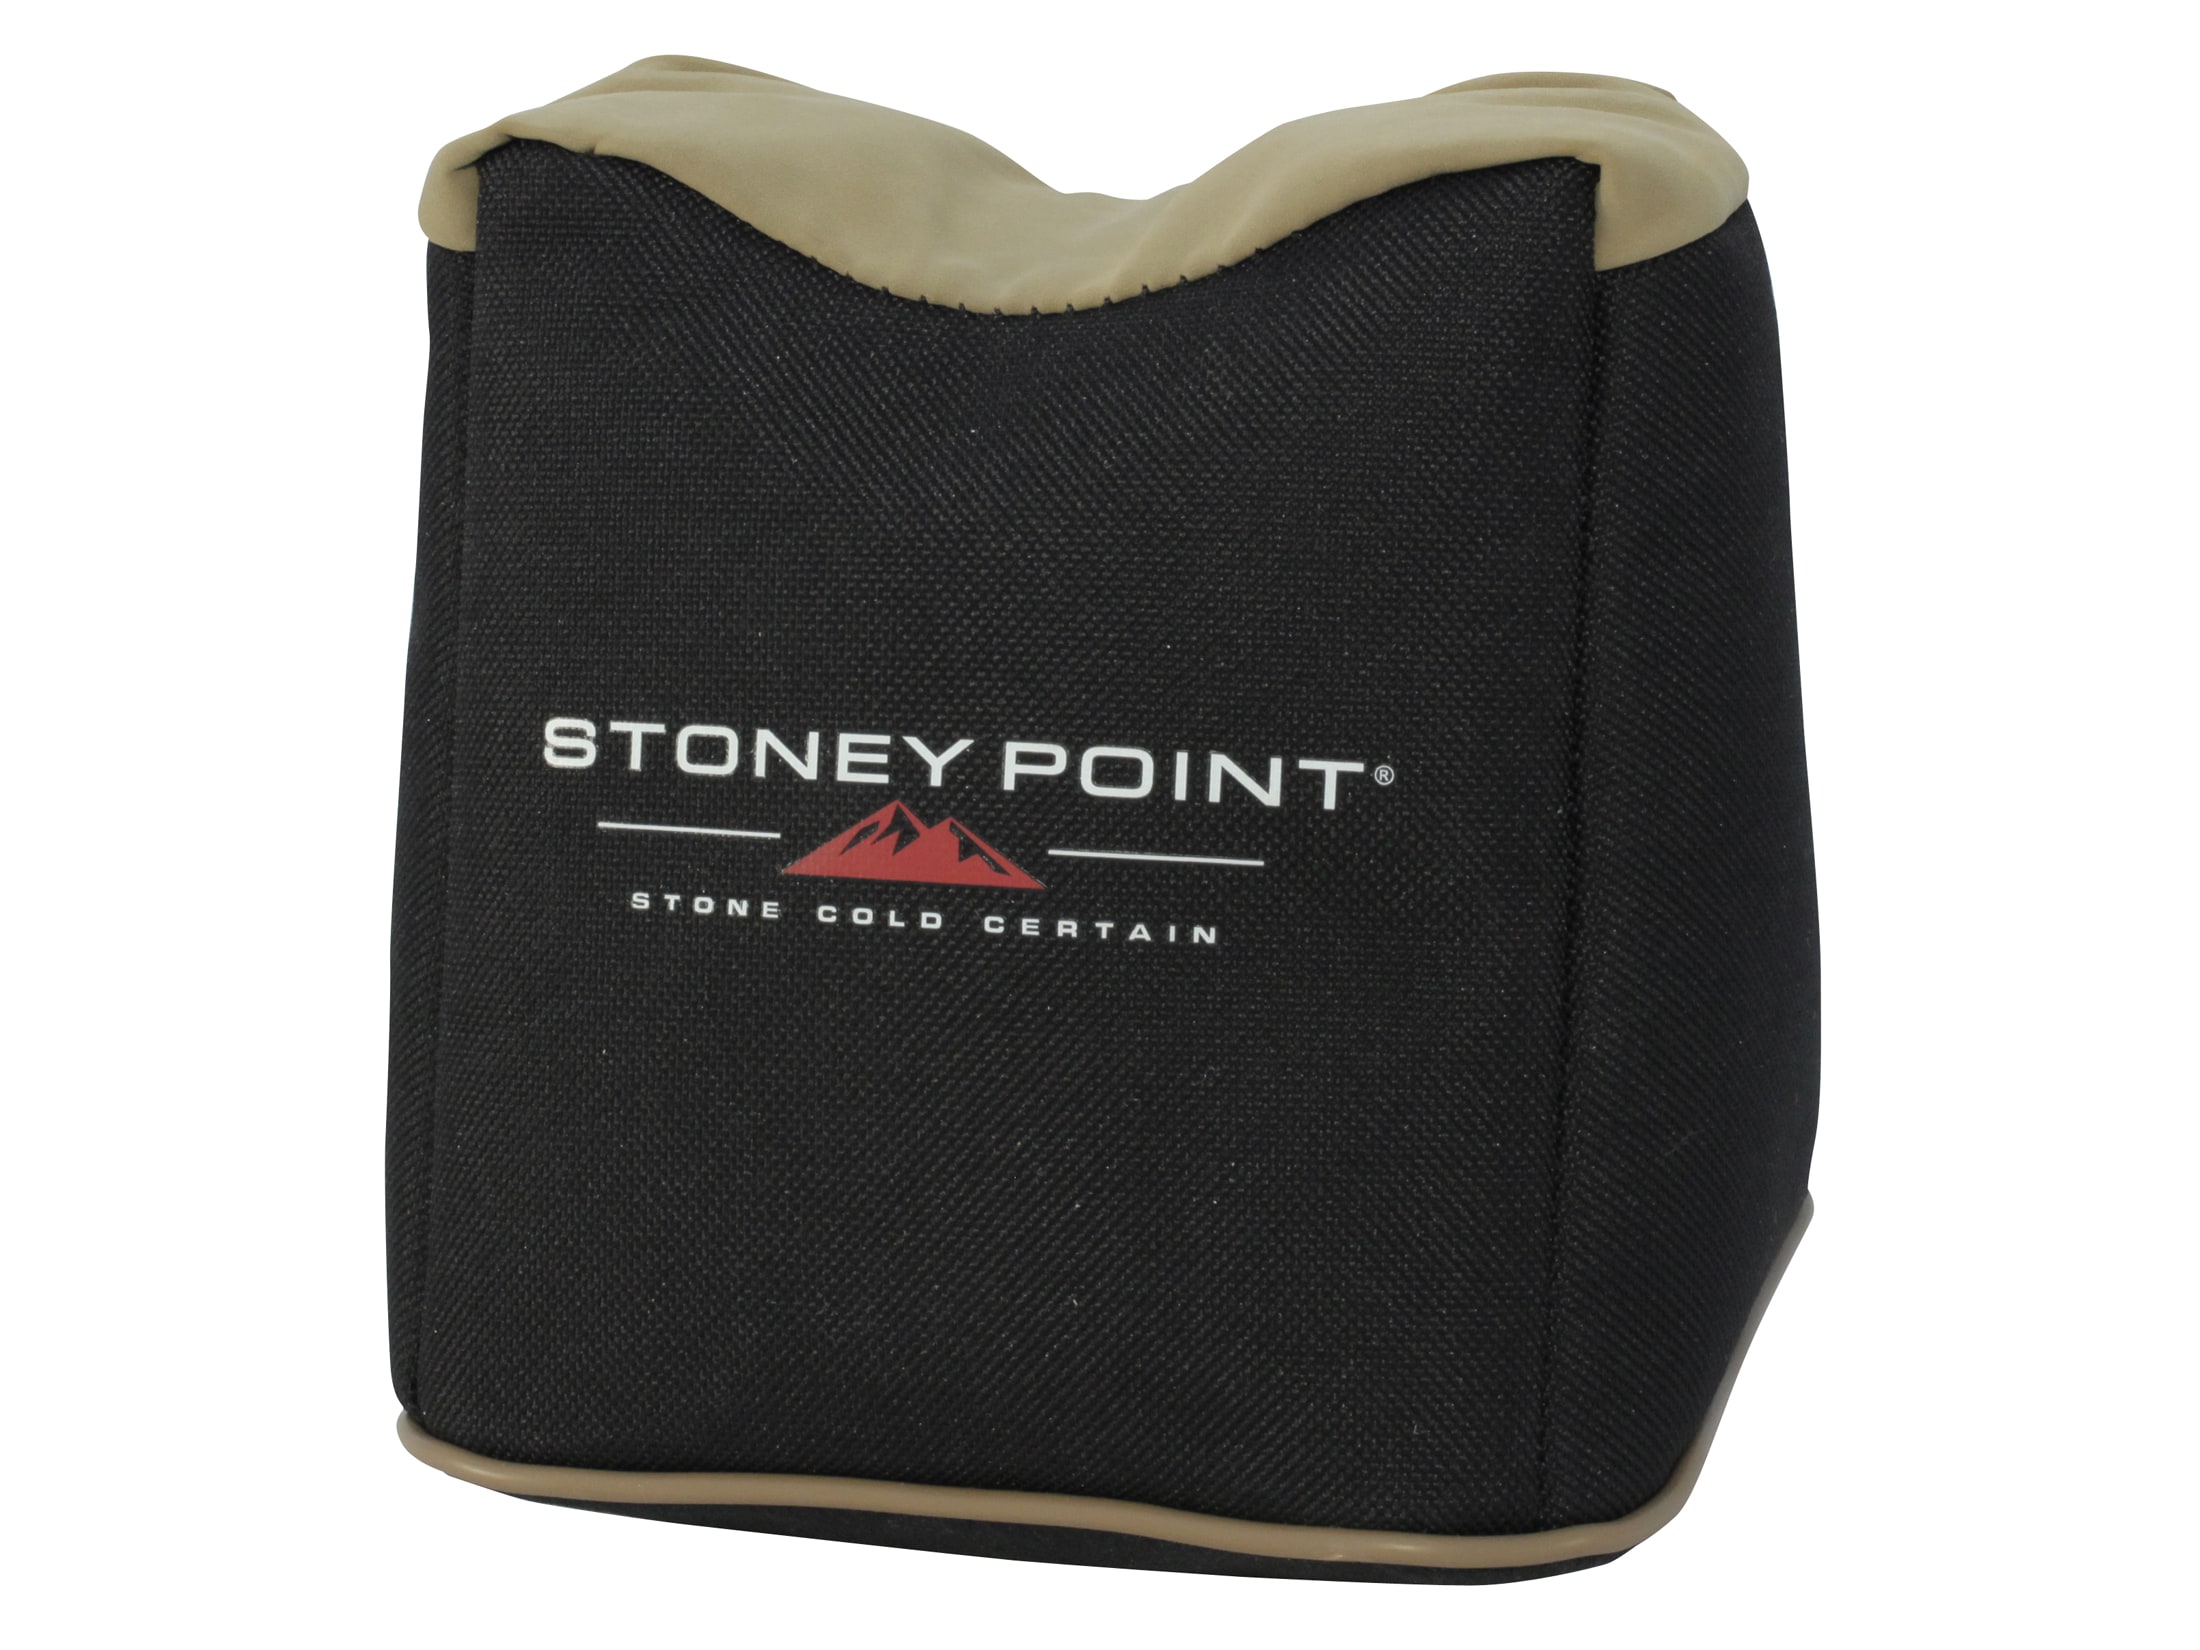 Stoney Point Standard Front Shooting Rest Bag Nylon Leather Filled